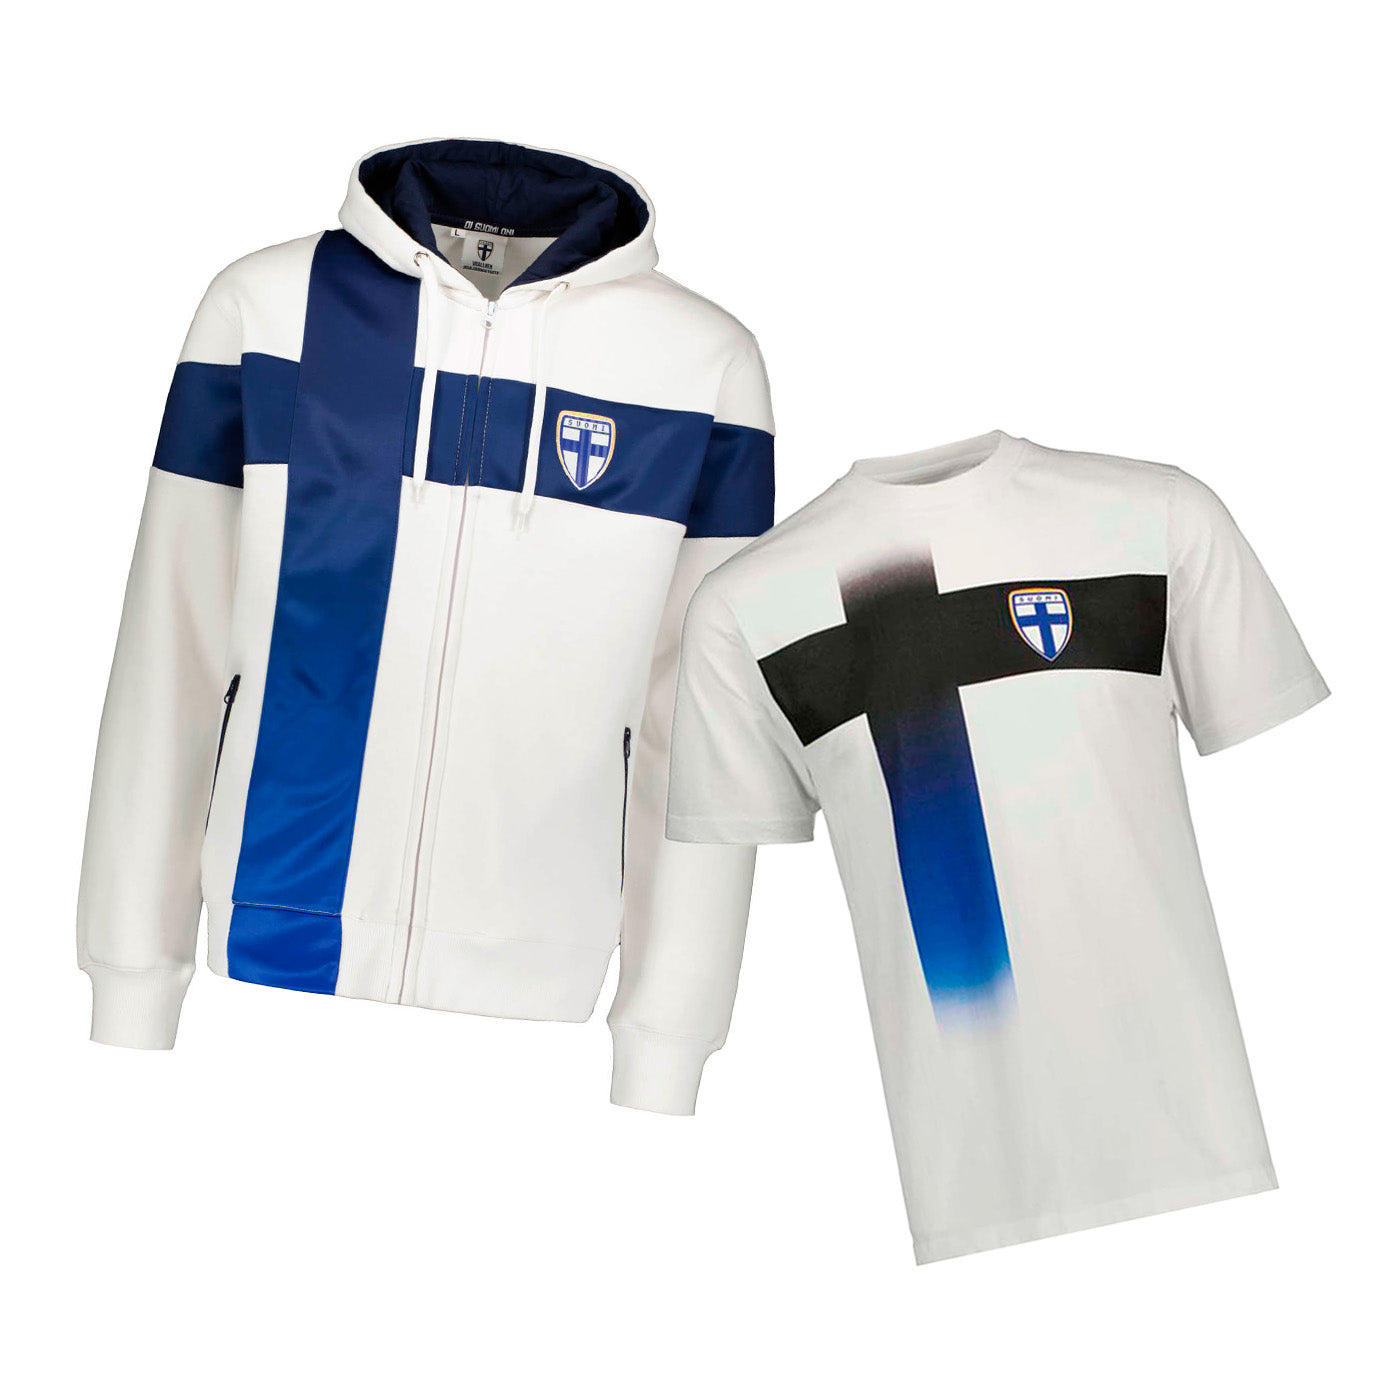 Kid's National Team Hoodie 2.0, with zipper and Cotton Fan T-shirt, Bundle